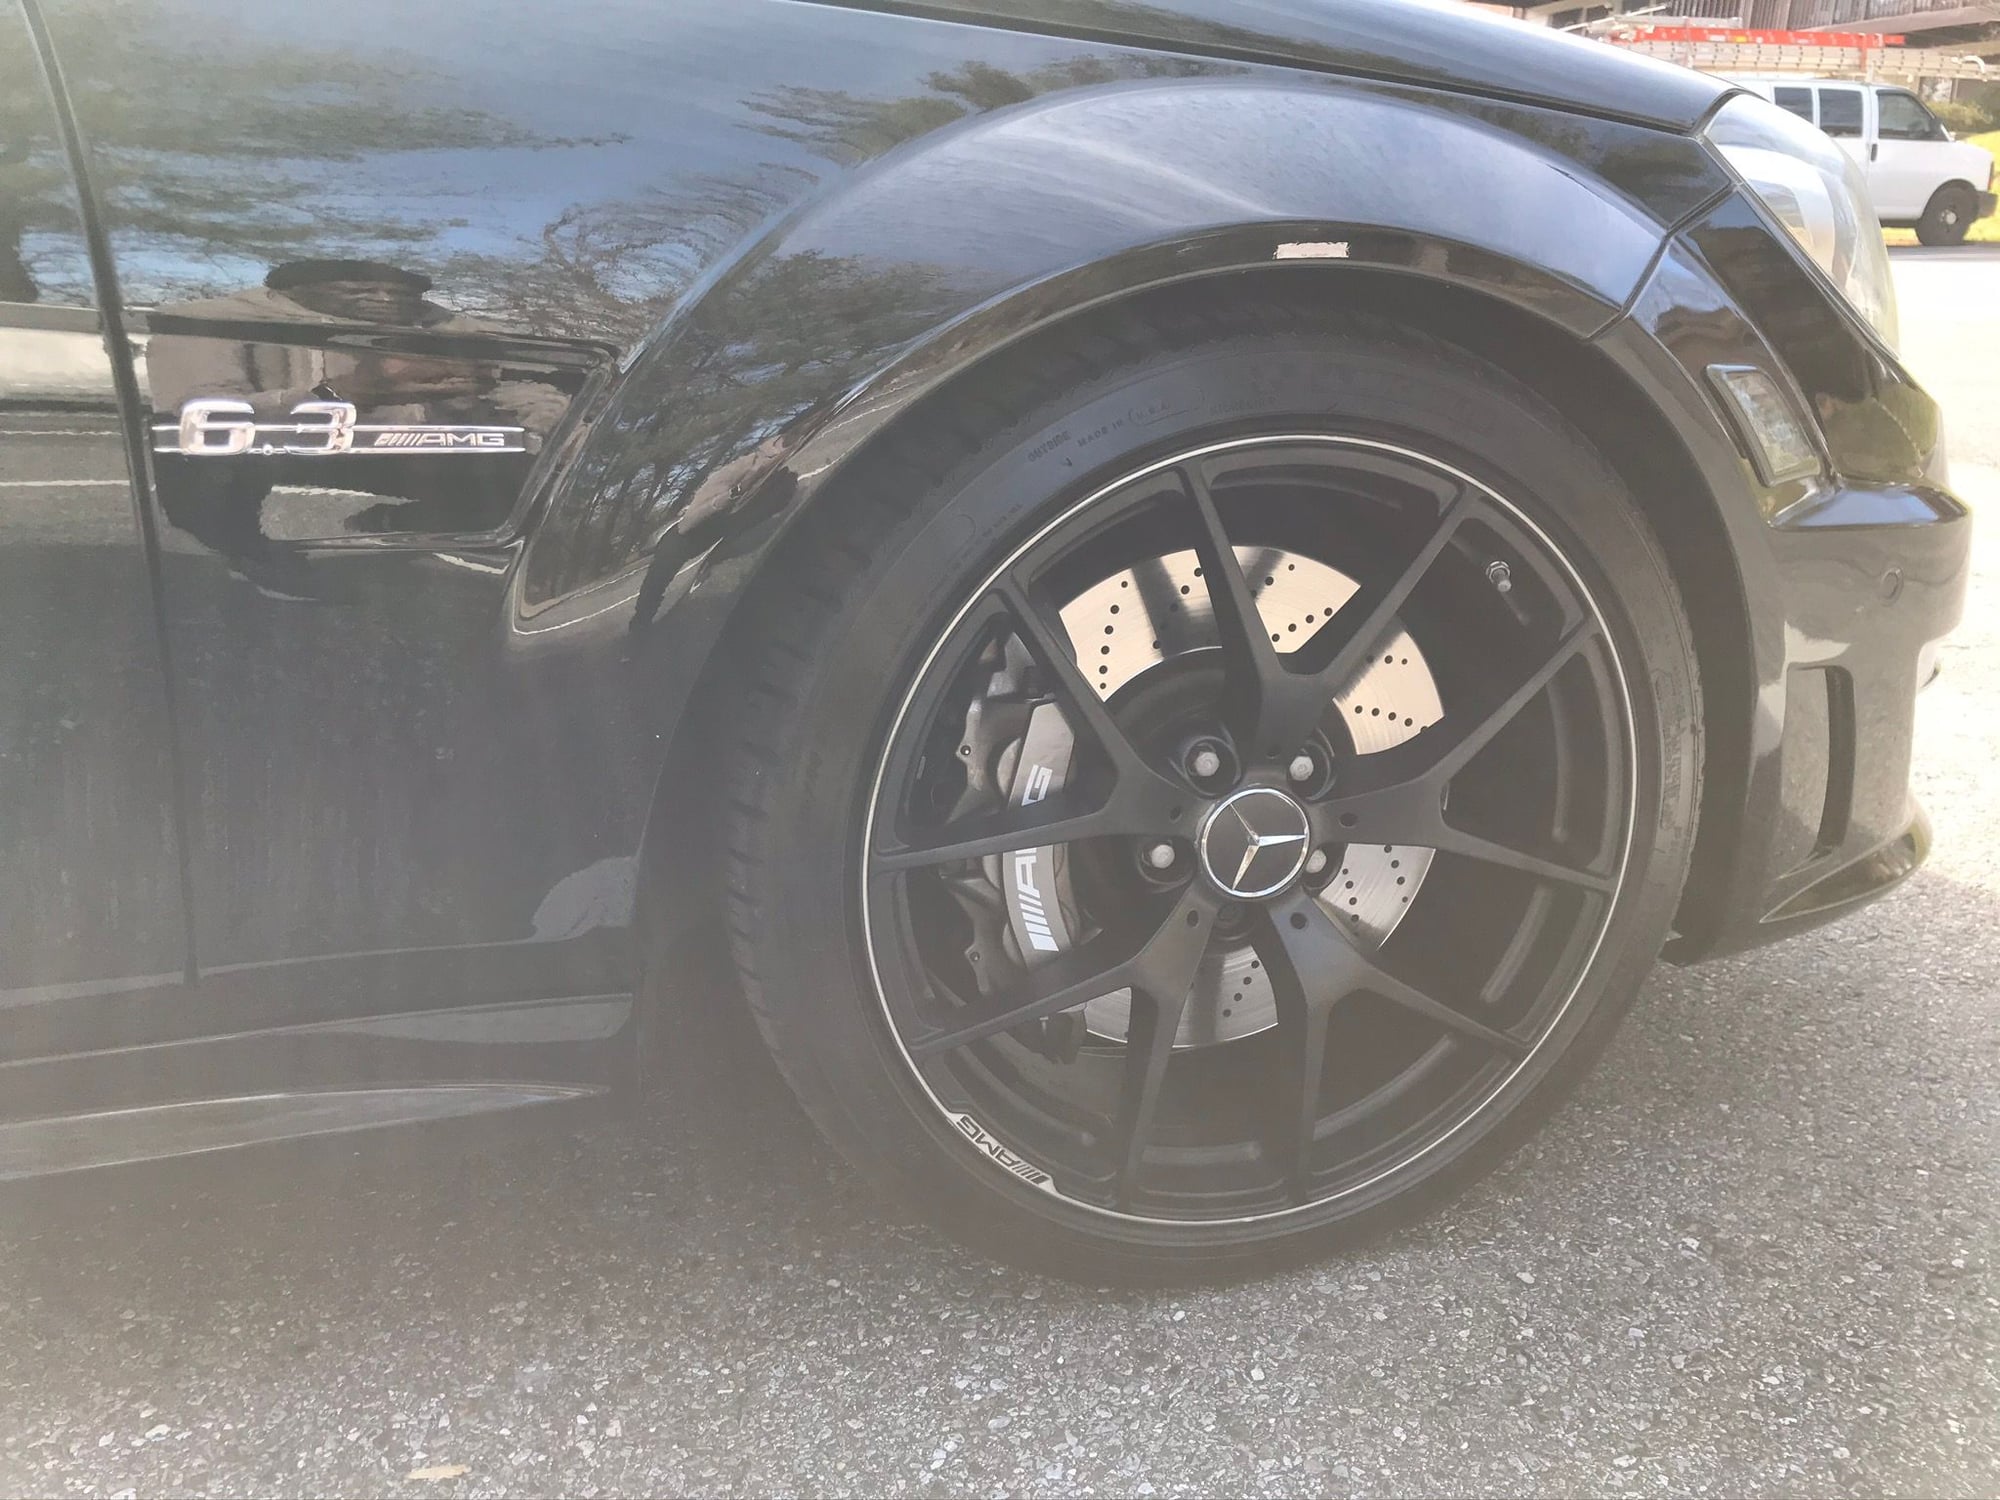 Wheels and Tires/Axles - Mercedes Benz C63 507 Edition Wheels For Sale - Used - 2011 to 2015 Mercedes-Benz C63 AMG - Rockville, MD 20852, United States